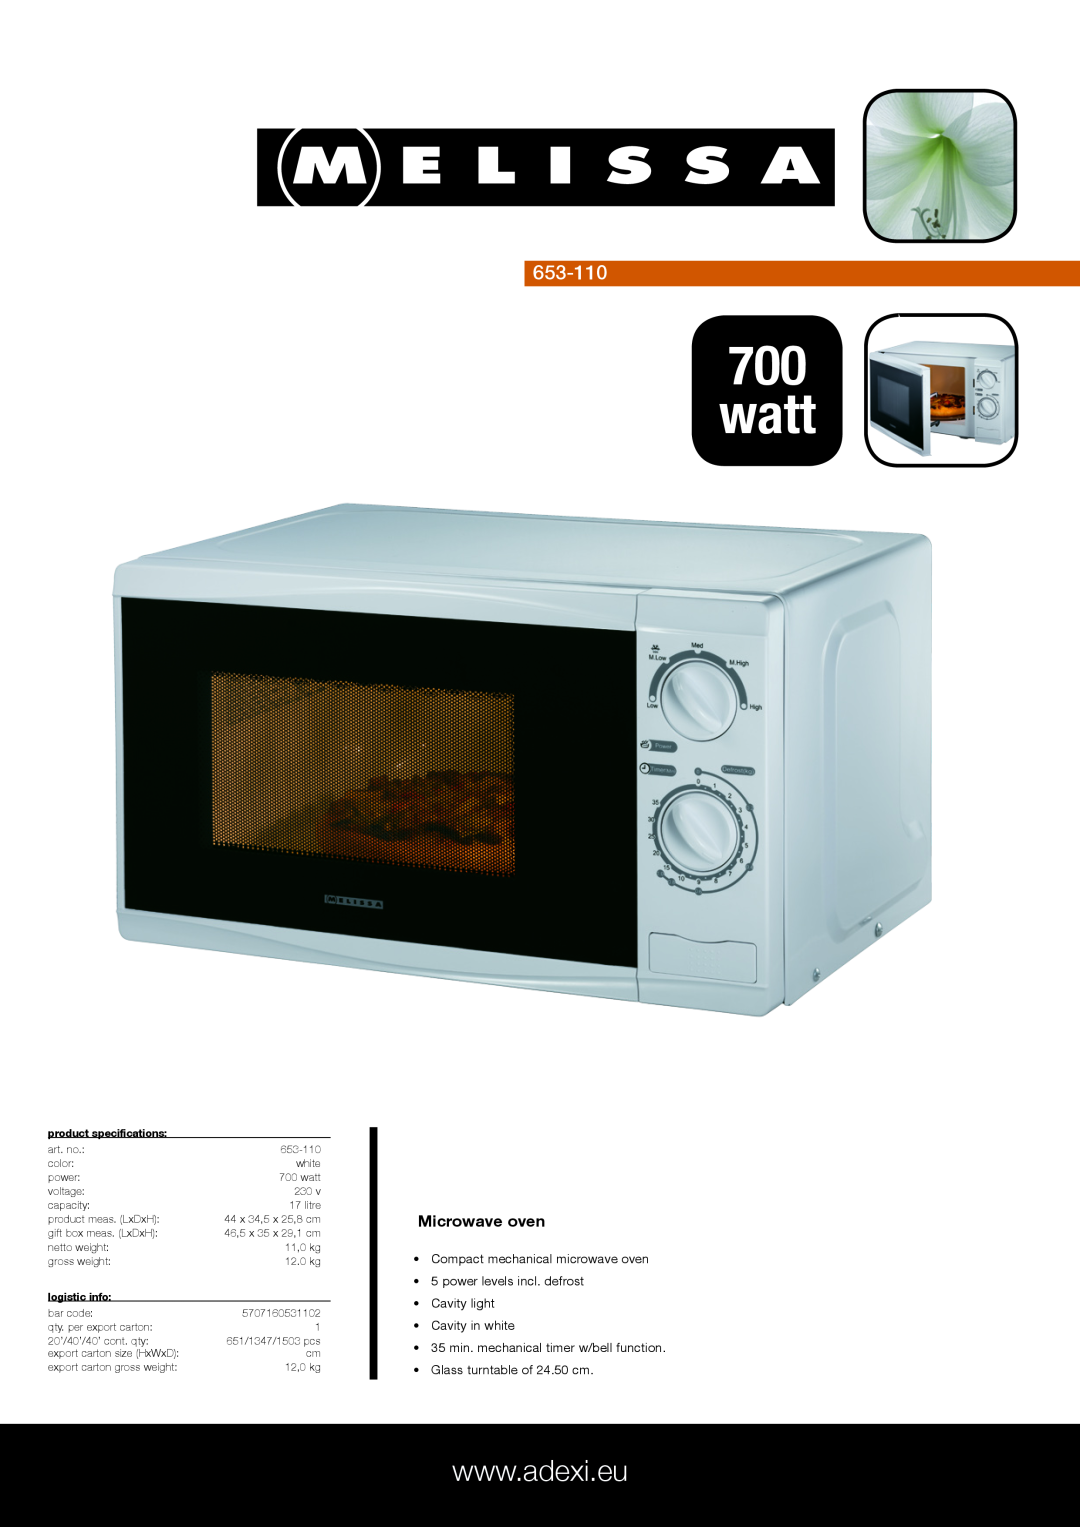 Melissa 653-110 specifications watt, Microwave oven, Compact mechanical microwave oven, Cavity in white, logistic info 